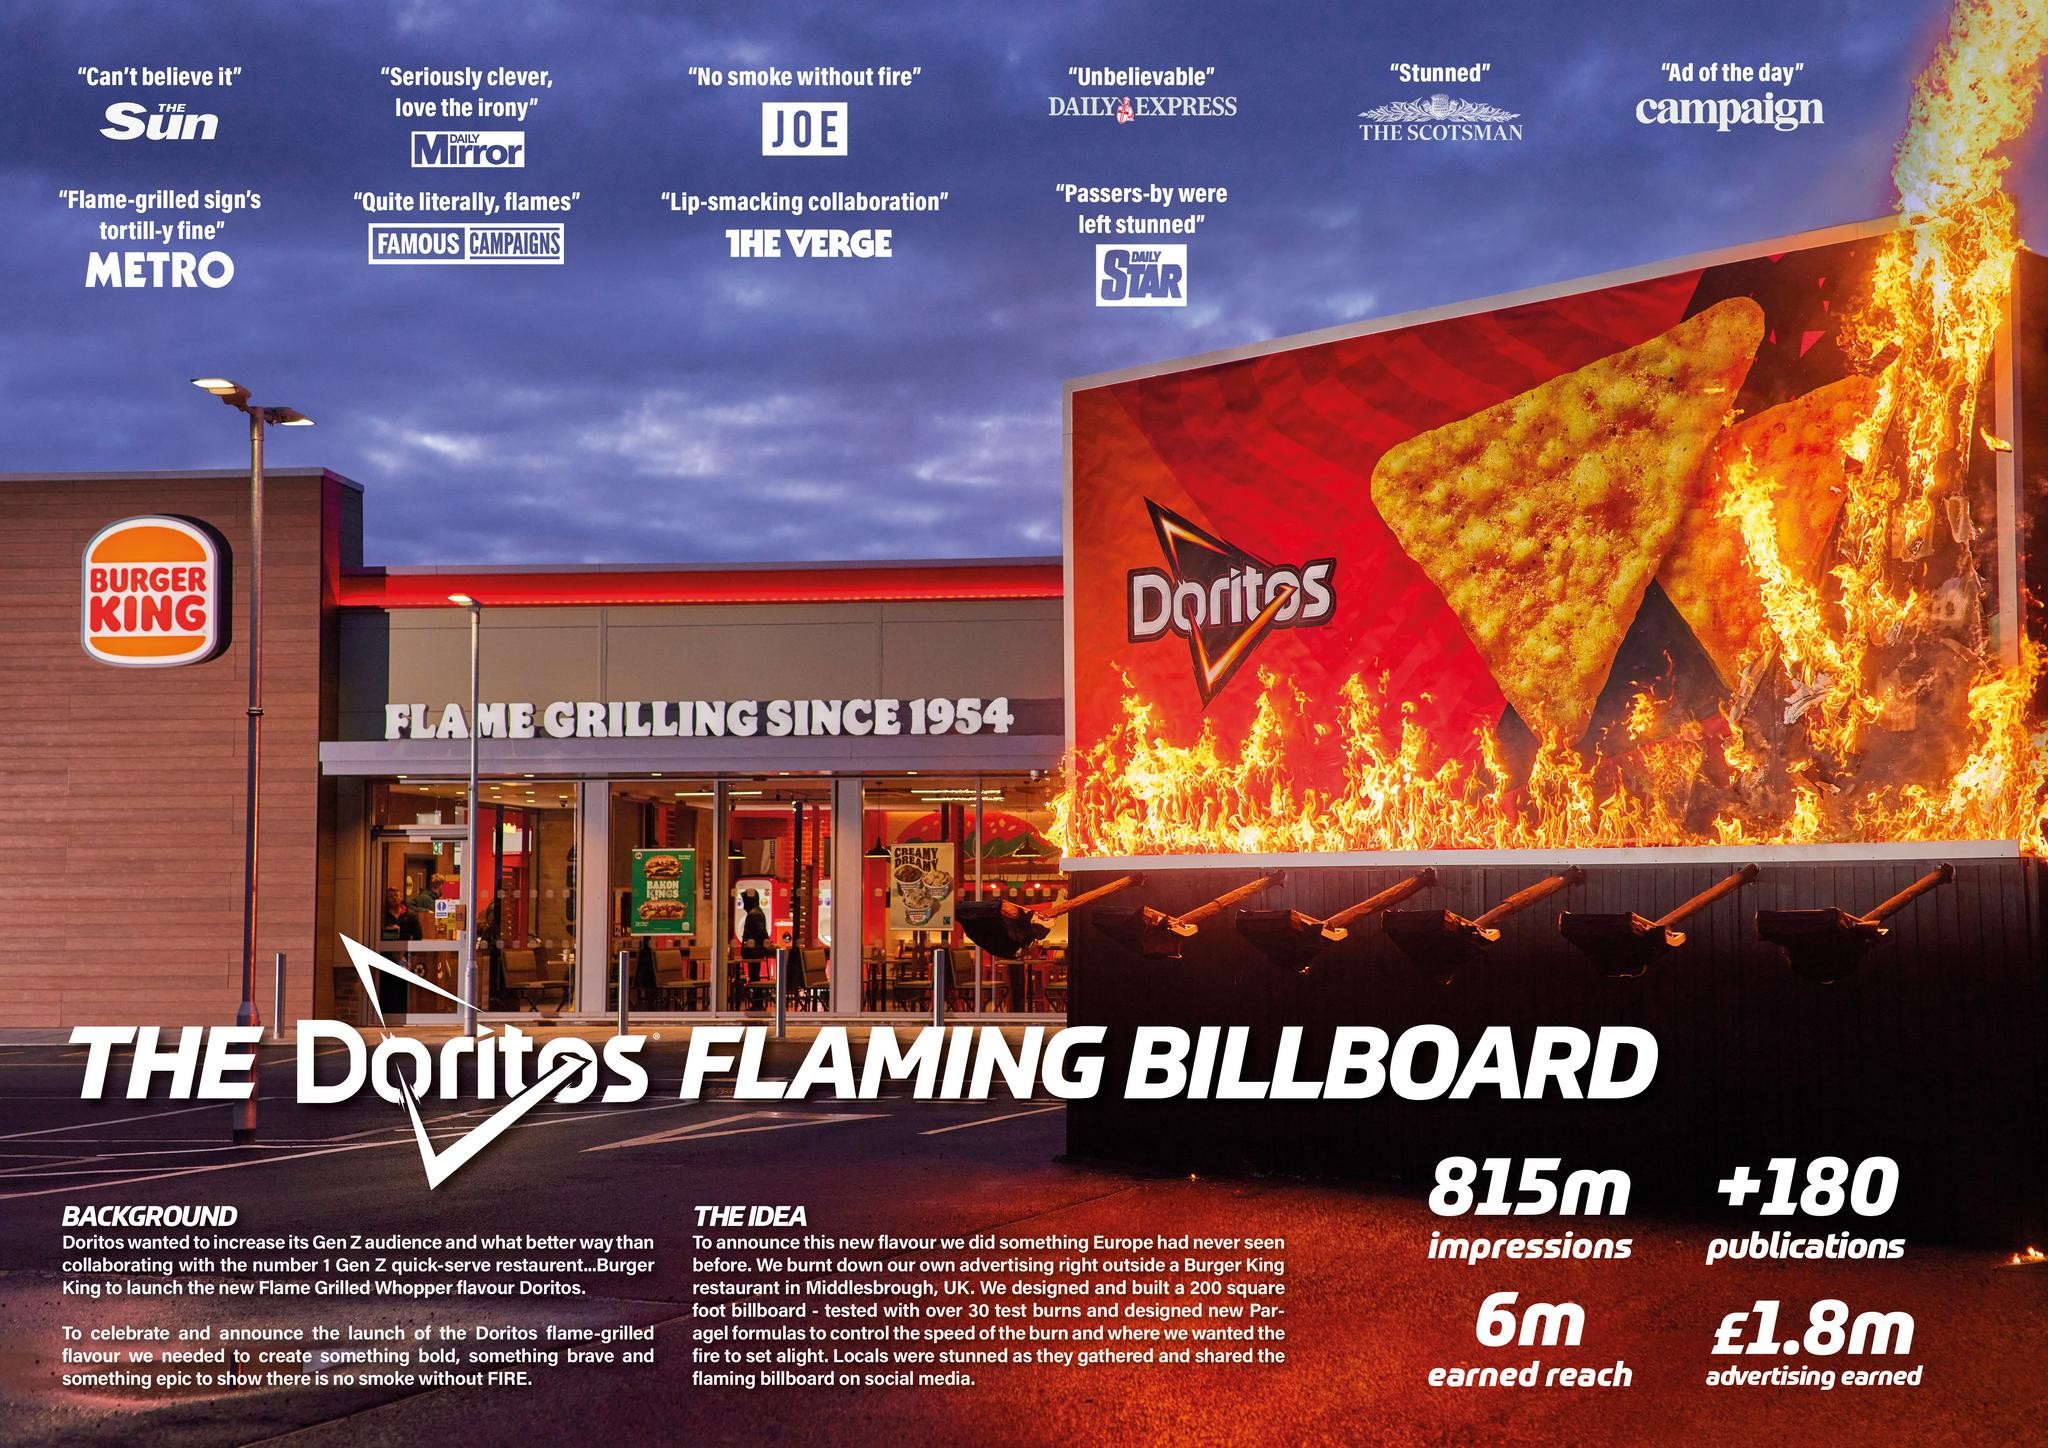 Flame-Grilled Whopper Flavour Doritos